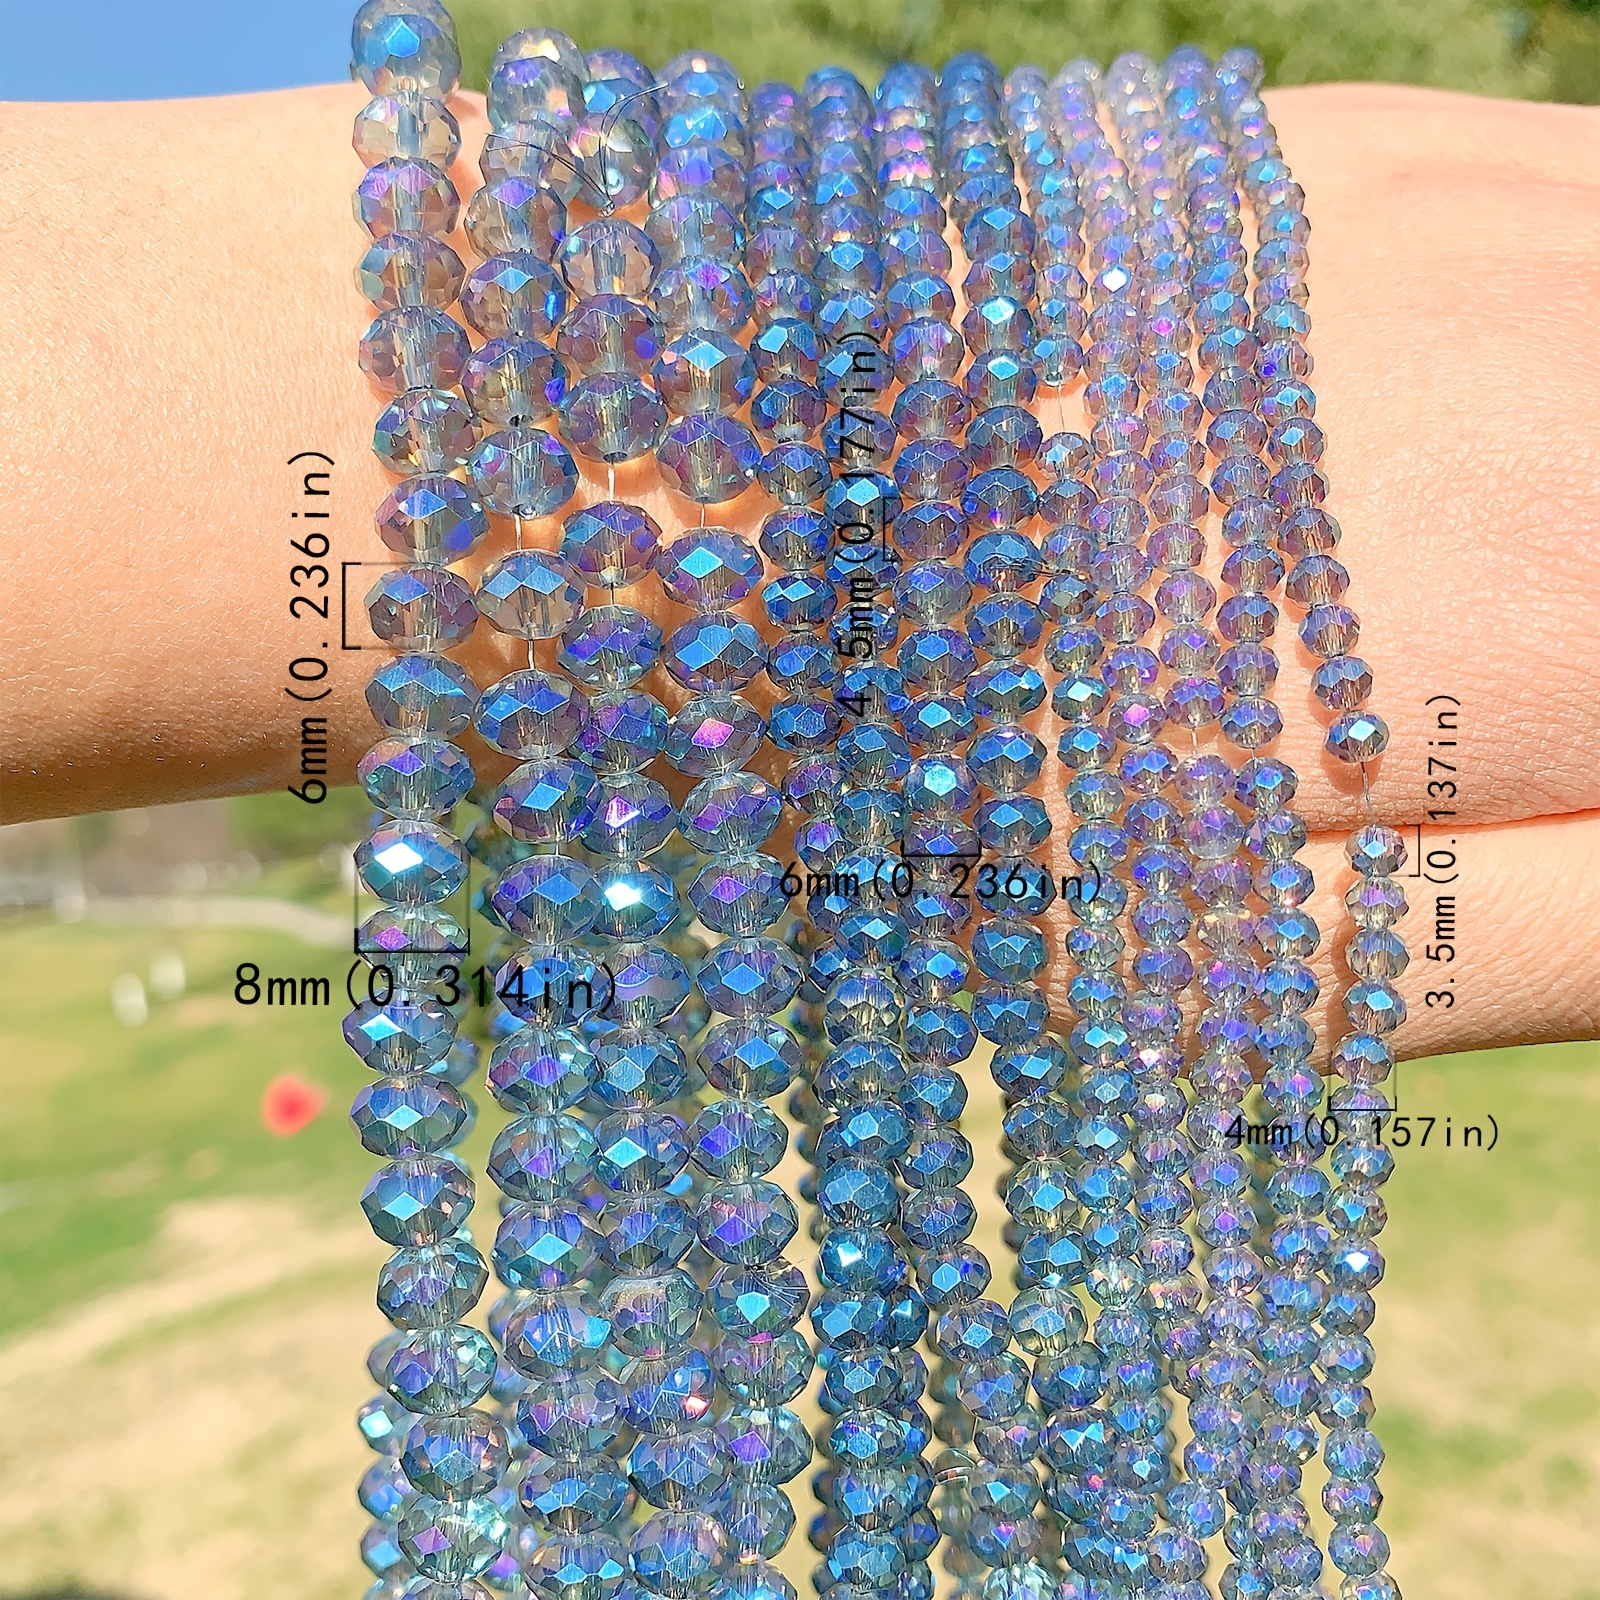 6mm Glass Beads, Clear Blue Water Beads, Jewelry Making Beads,faceted  Beads, Rondelle Shaped Beads, Blue Beads, Bracelet Beads 